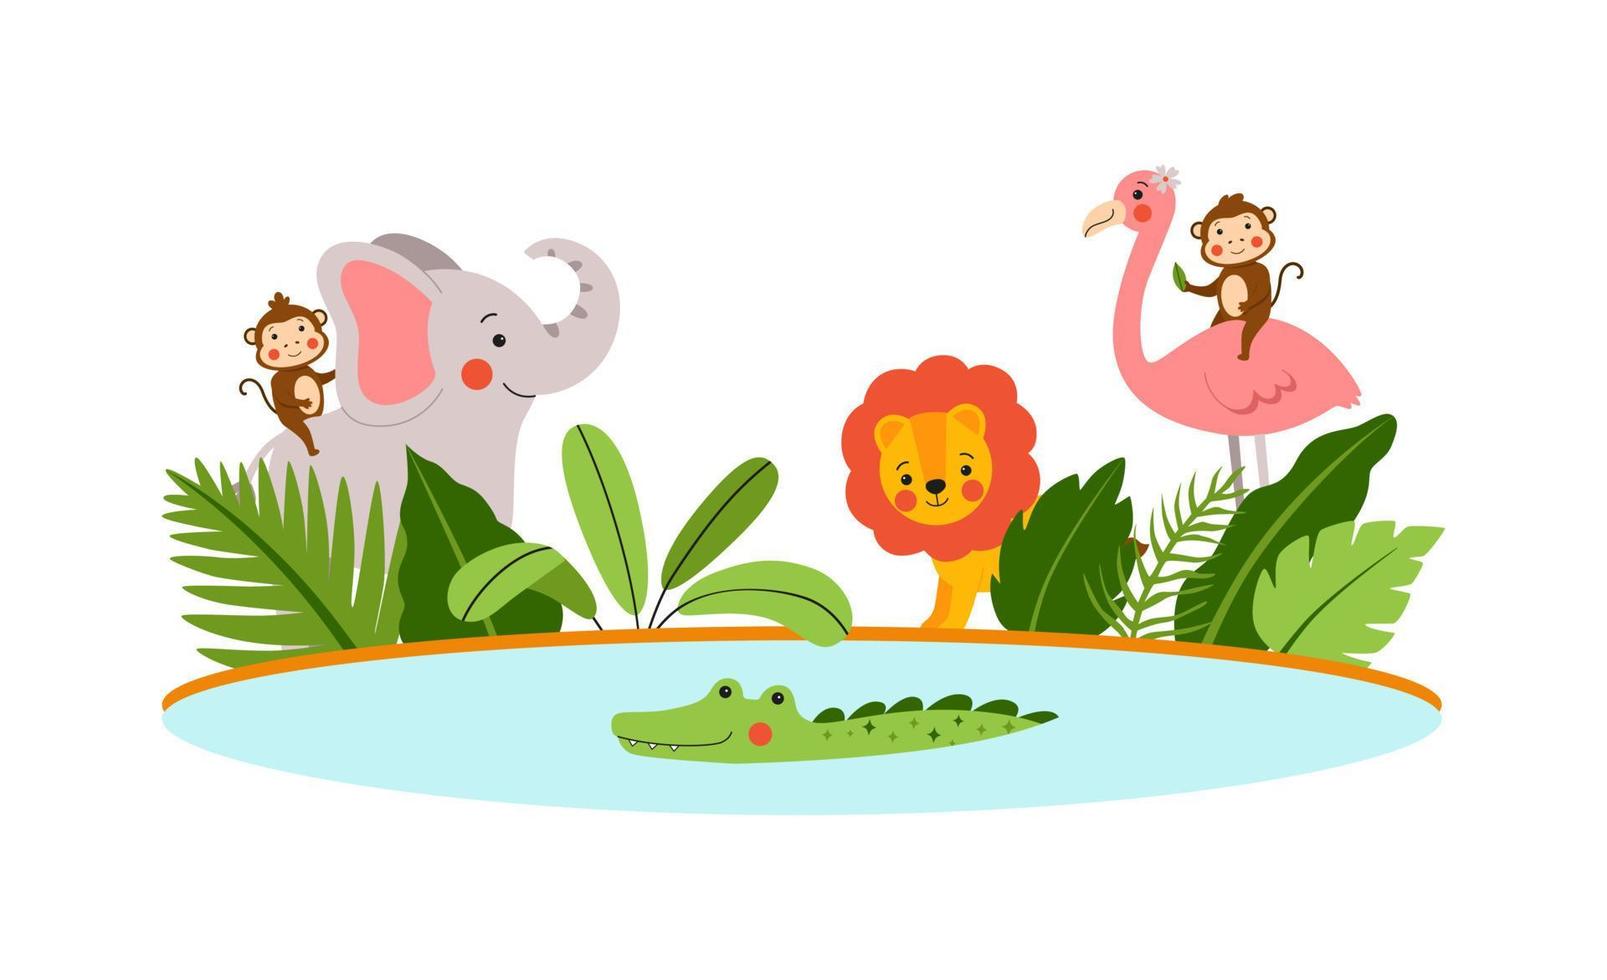 Group of cute safari animals on the banks of a tropical river vector